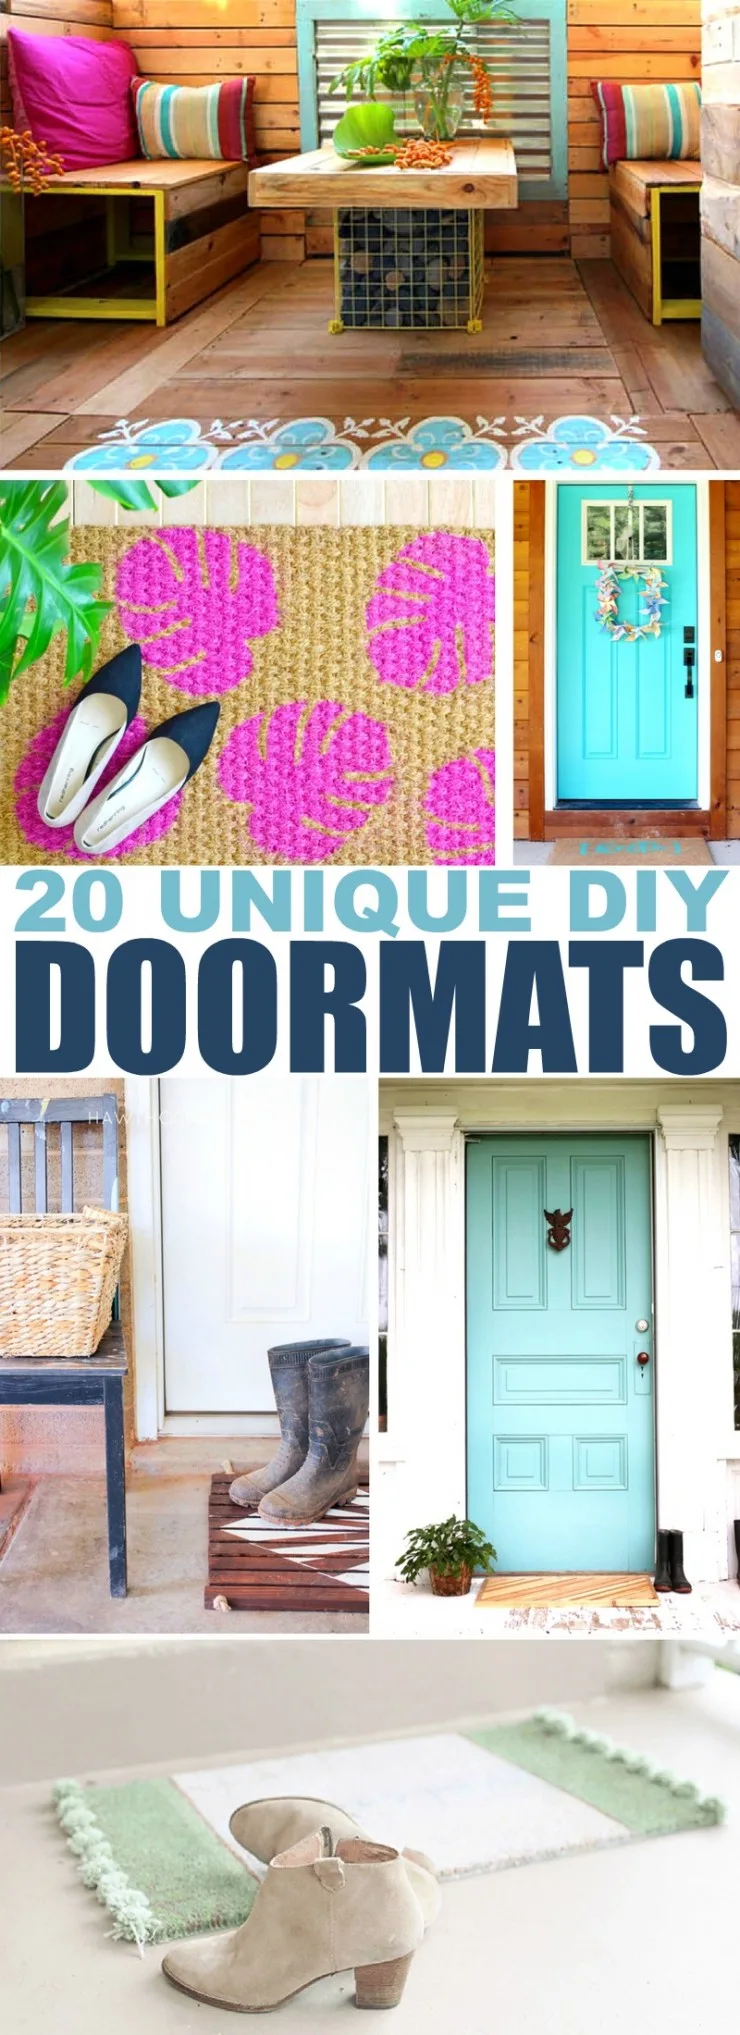 Give your home décor a fresh look with one of these unique DIY doormats.